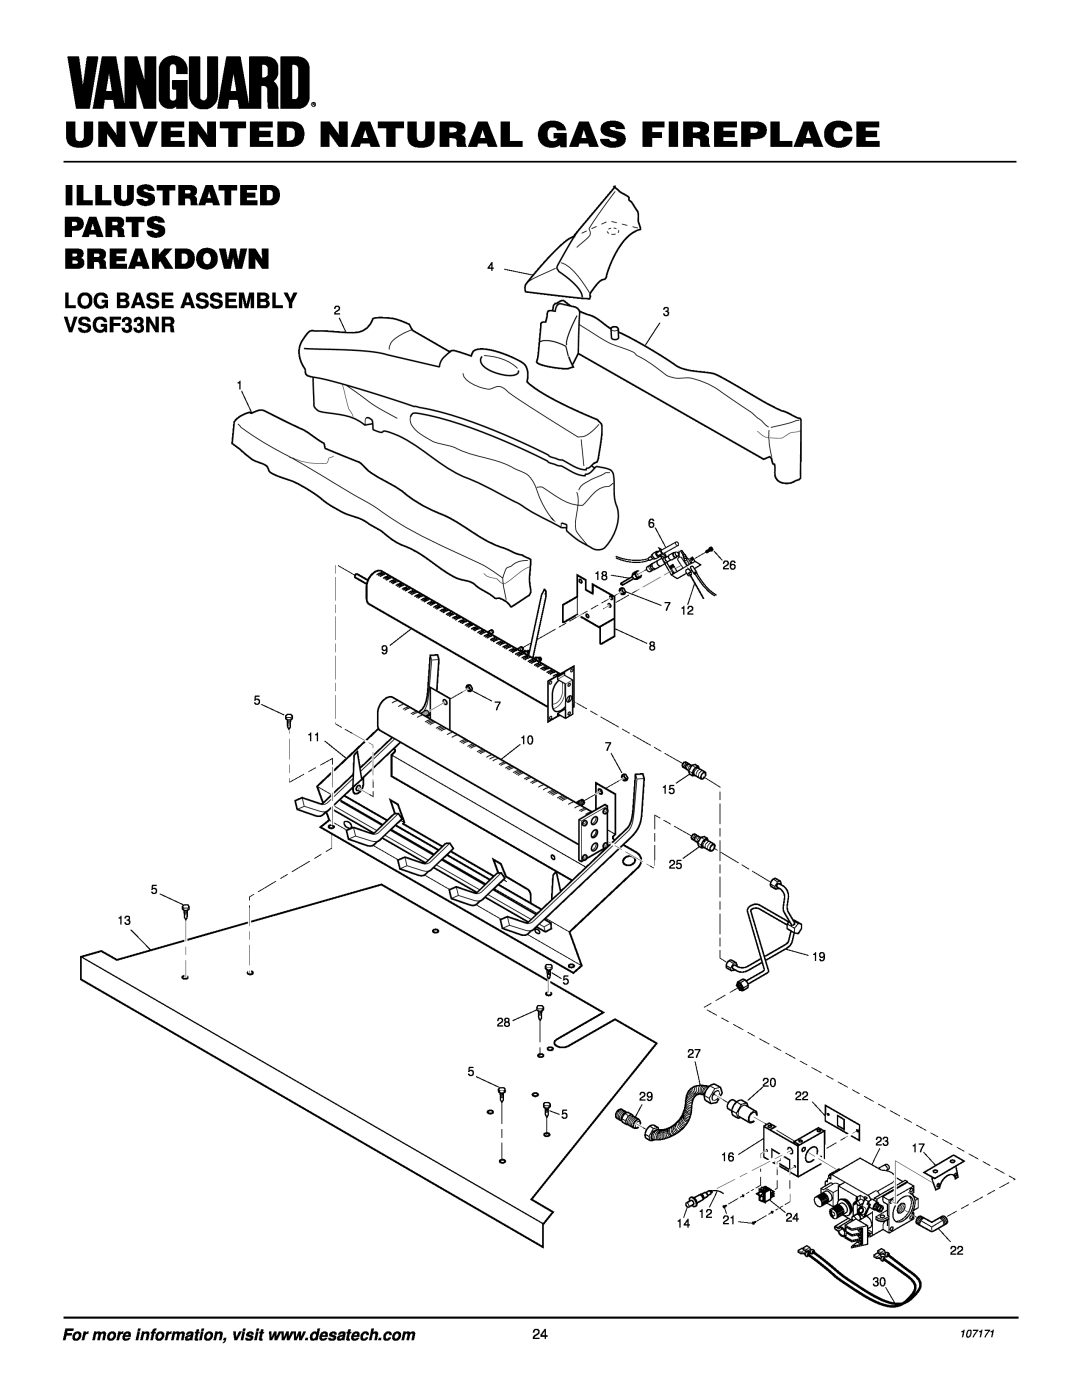 Desa VSGF33NR installation manual ILLUSTRATED PARTS BREAKDOWN4, Log Base Assembly, Unvented Natural Gas Fireplace 